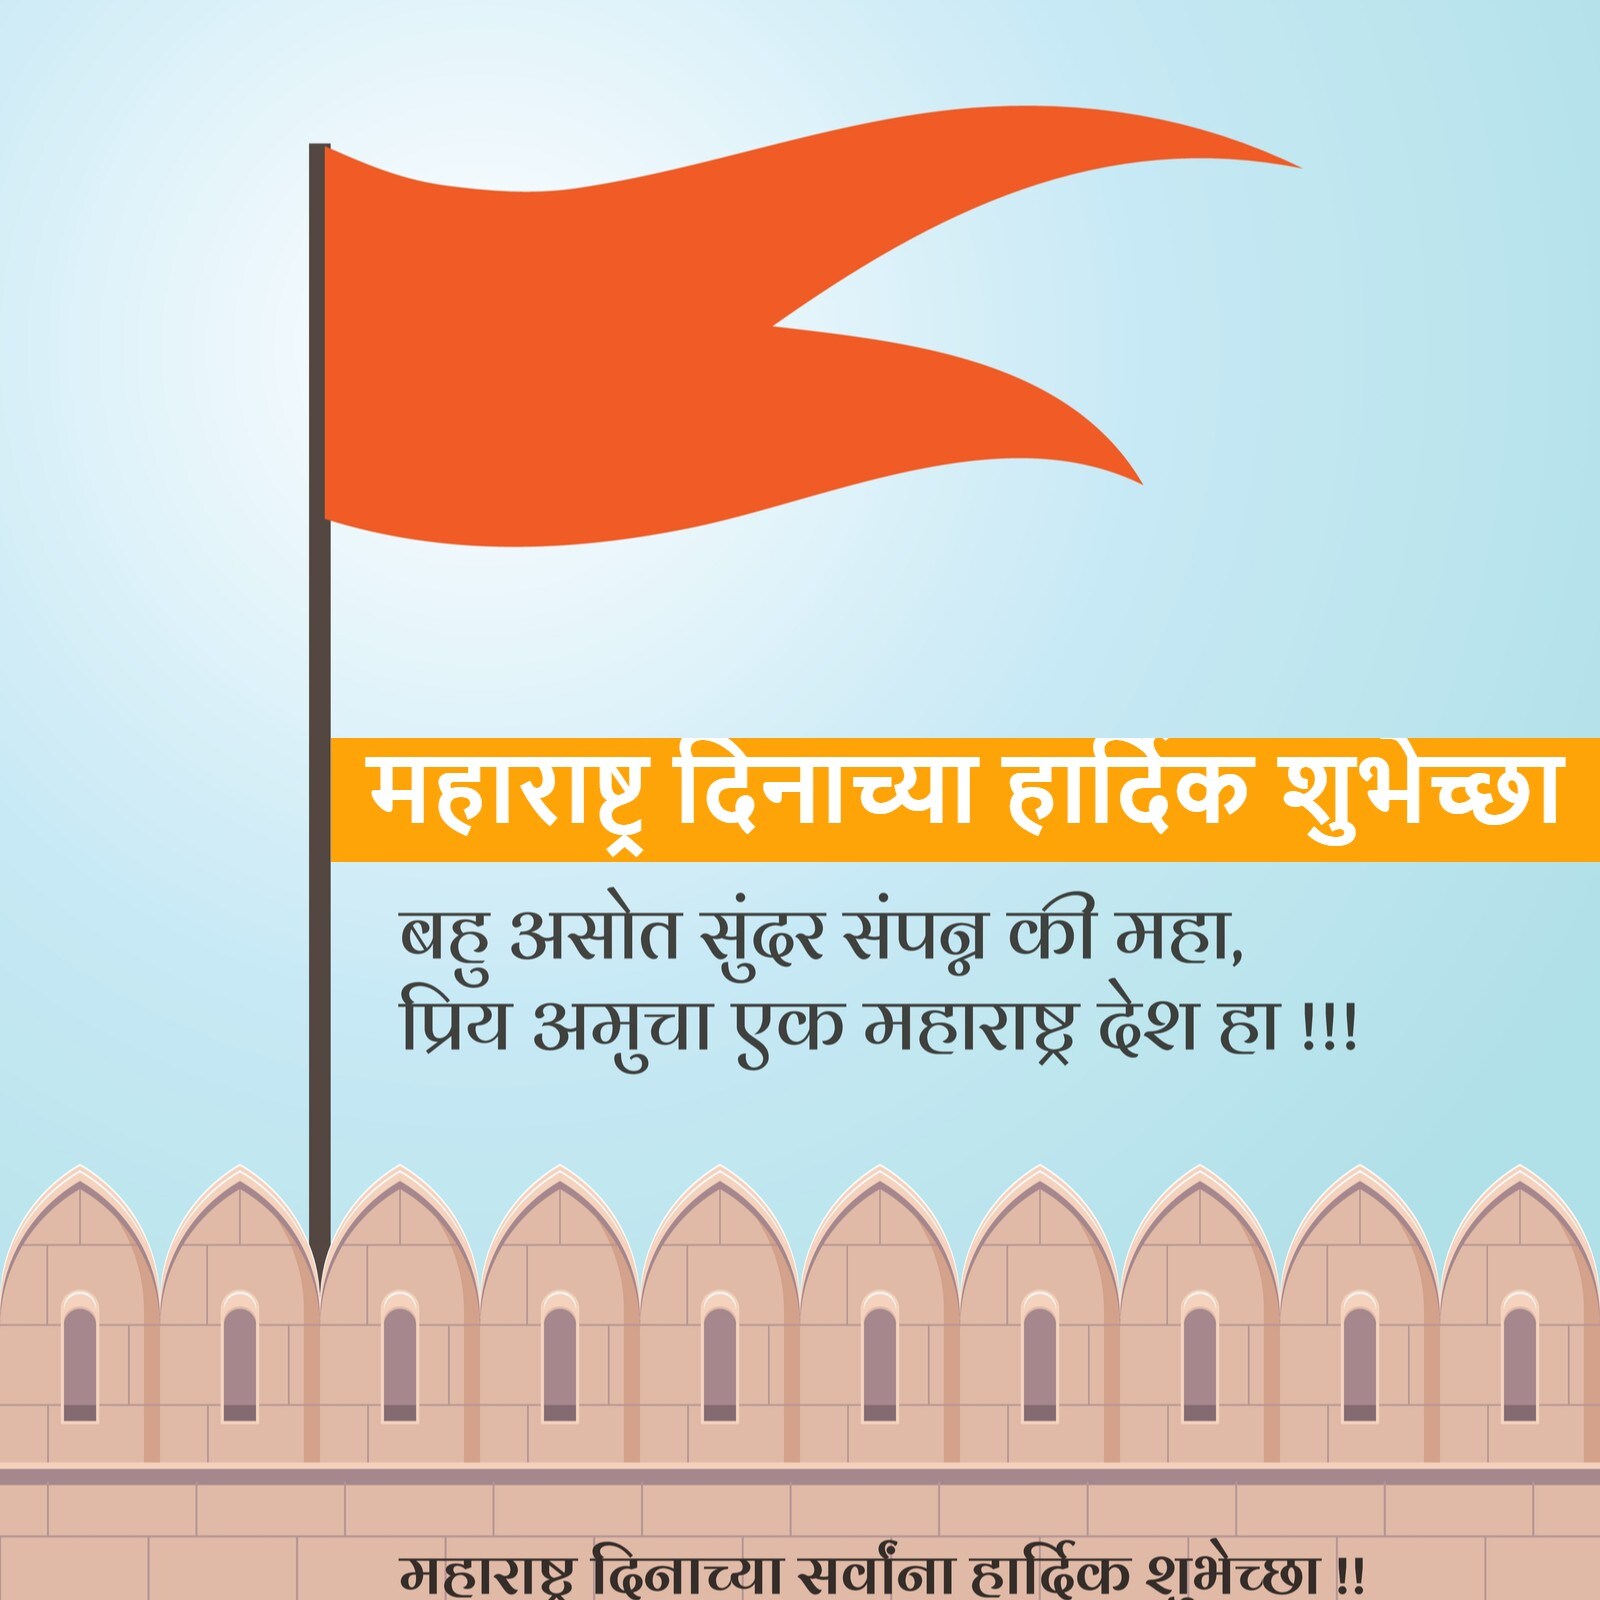 Happy Maharashtra Day 2022: Wishes, Images, Status, Quotes, Messages and  WhatsApp Greetings to Share in English and Marathi